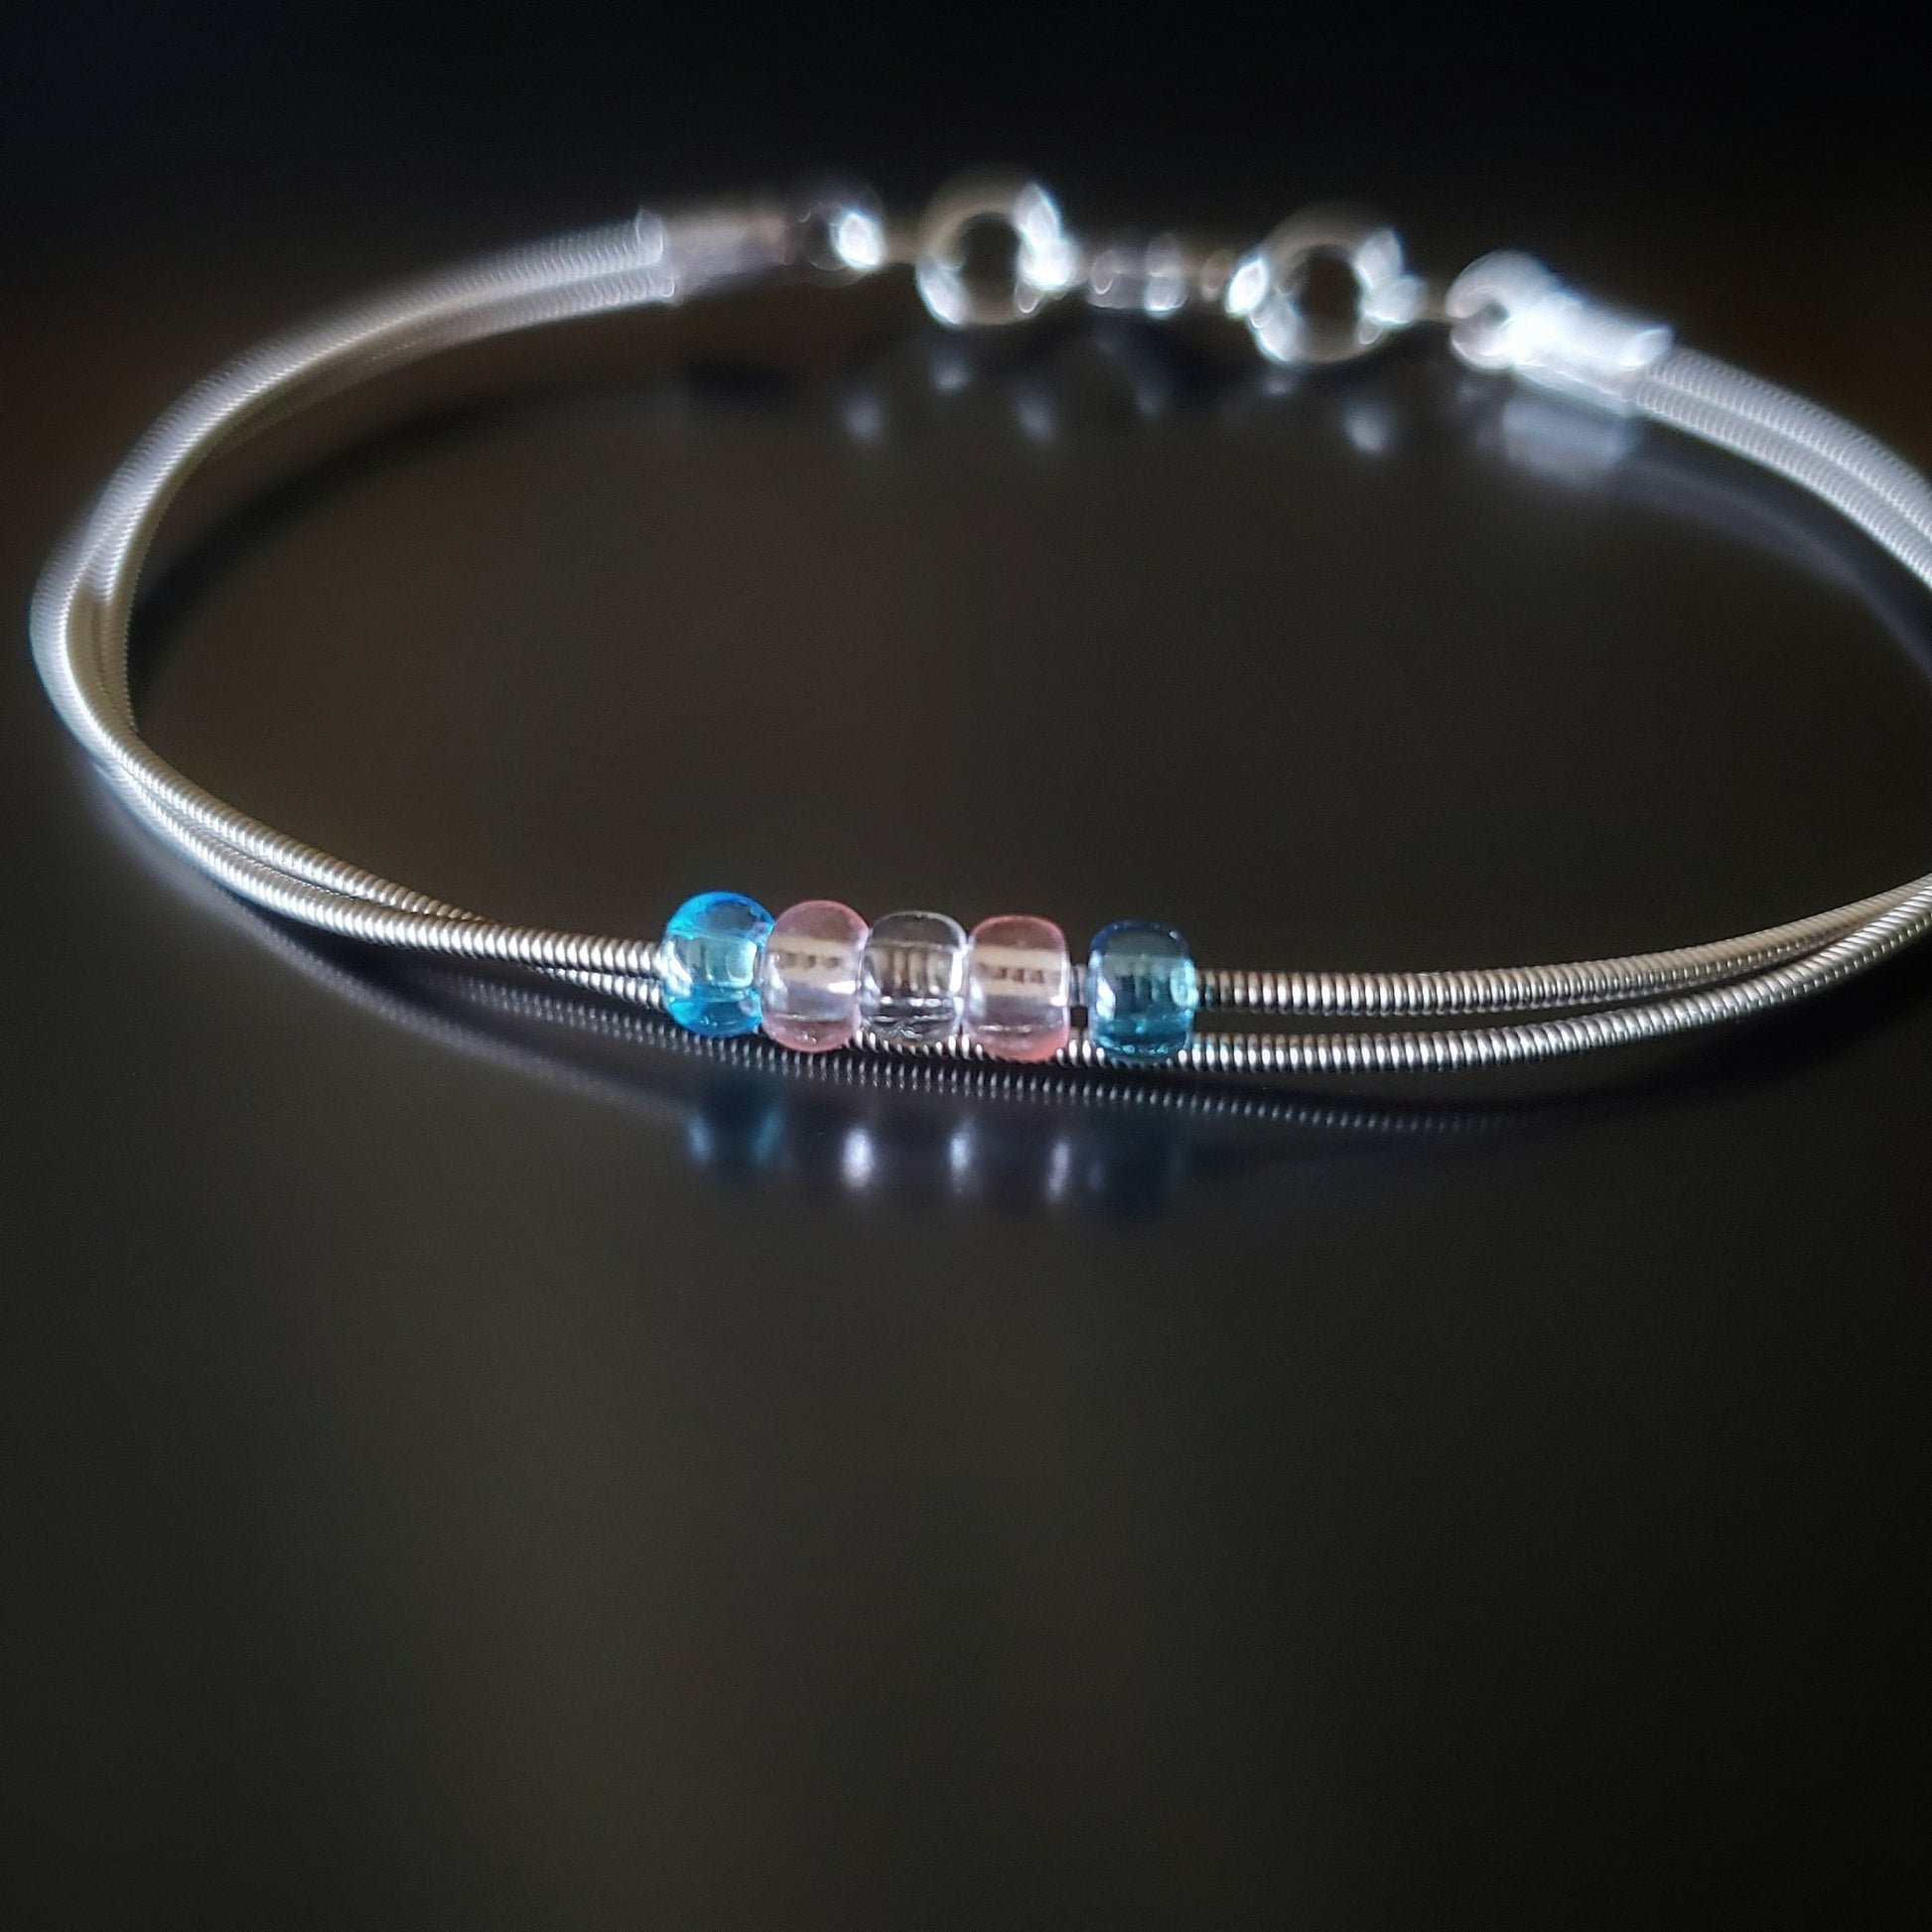 silver coloured clasp style bracelet made from upcycled guitar strings - there are 5 beads representing the colours of the transgender pride flag - 2 blue, 2 pink and 1 white